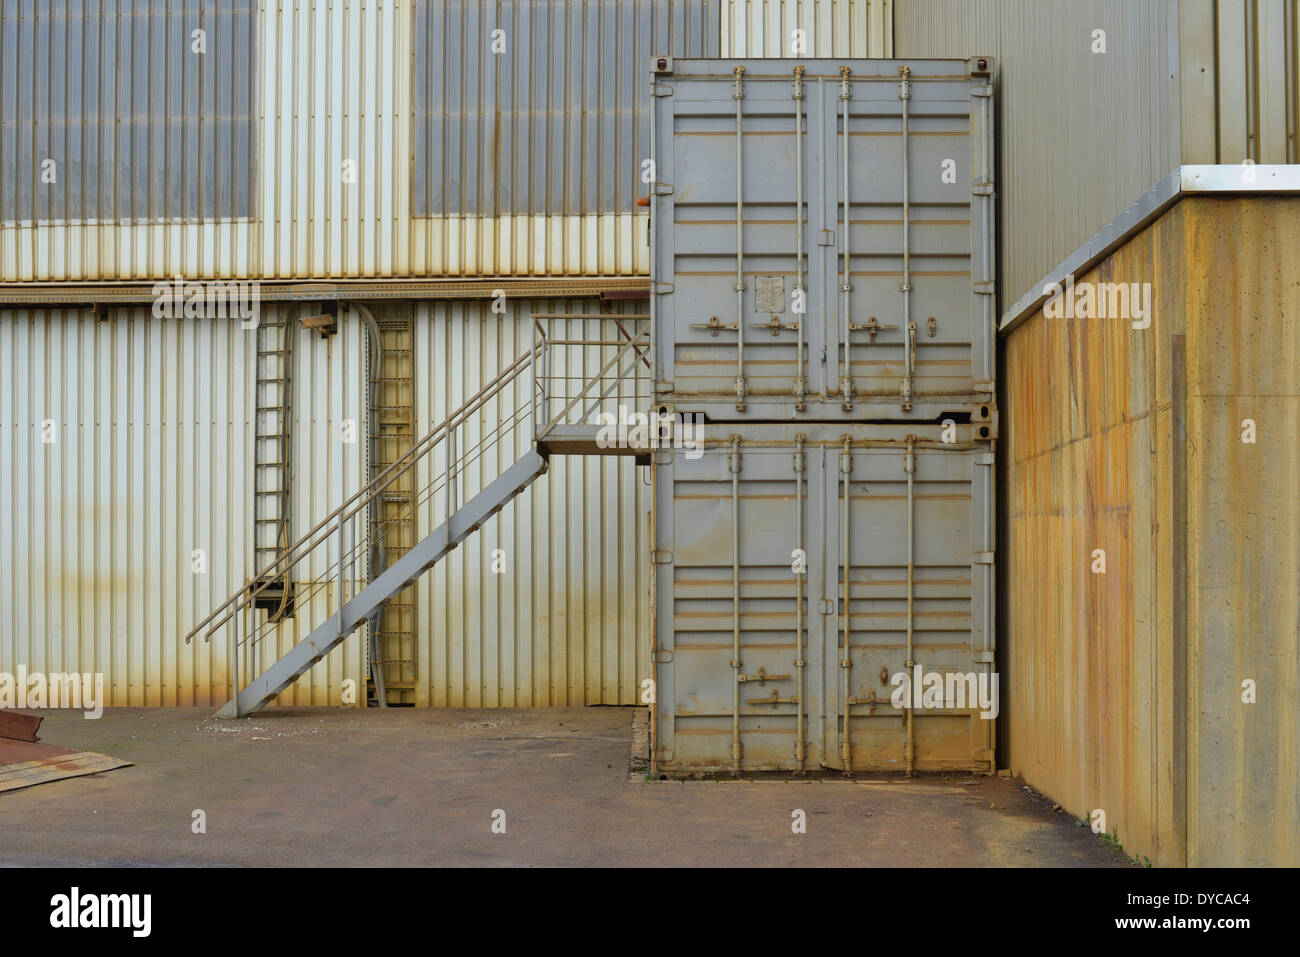 Shipping containers being used for office or storage space in an industrial setting. Stock Photo